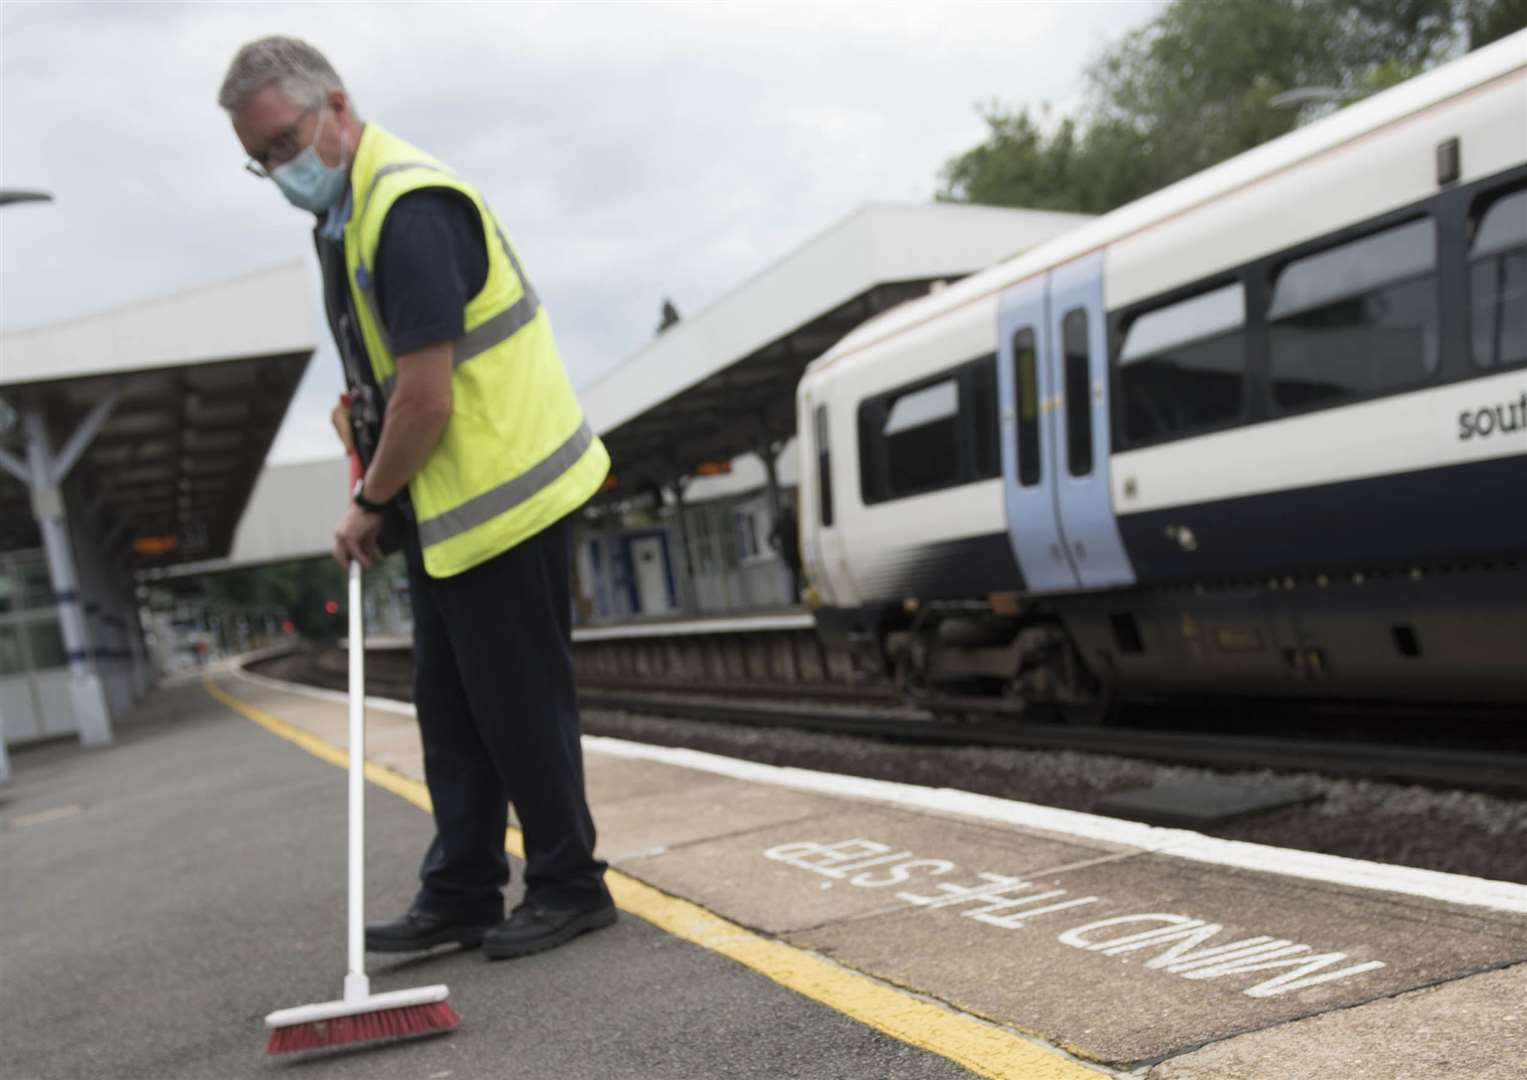 The RMT says cleaning staff should be given a pay rise as a dispute with their employer continues. Stock image: Southeastern